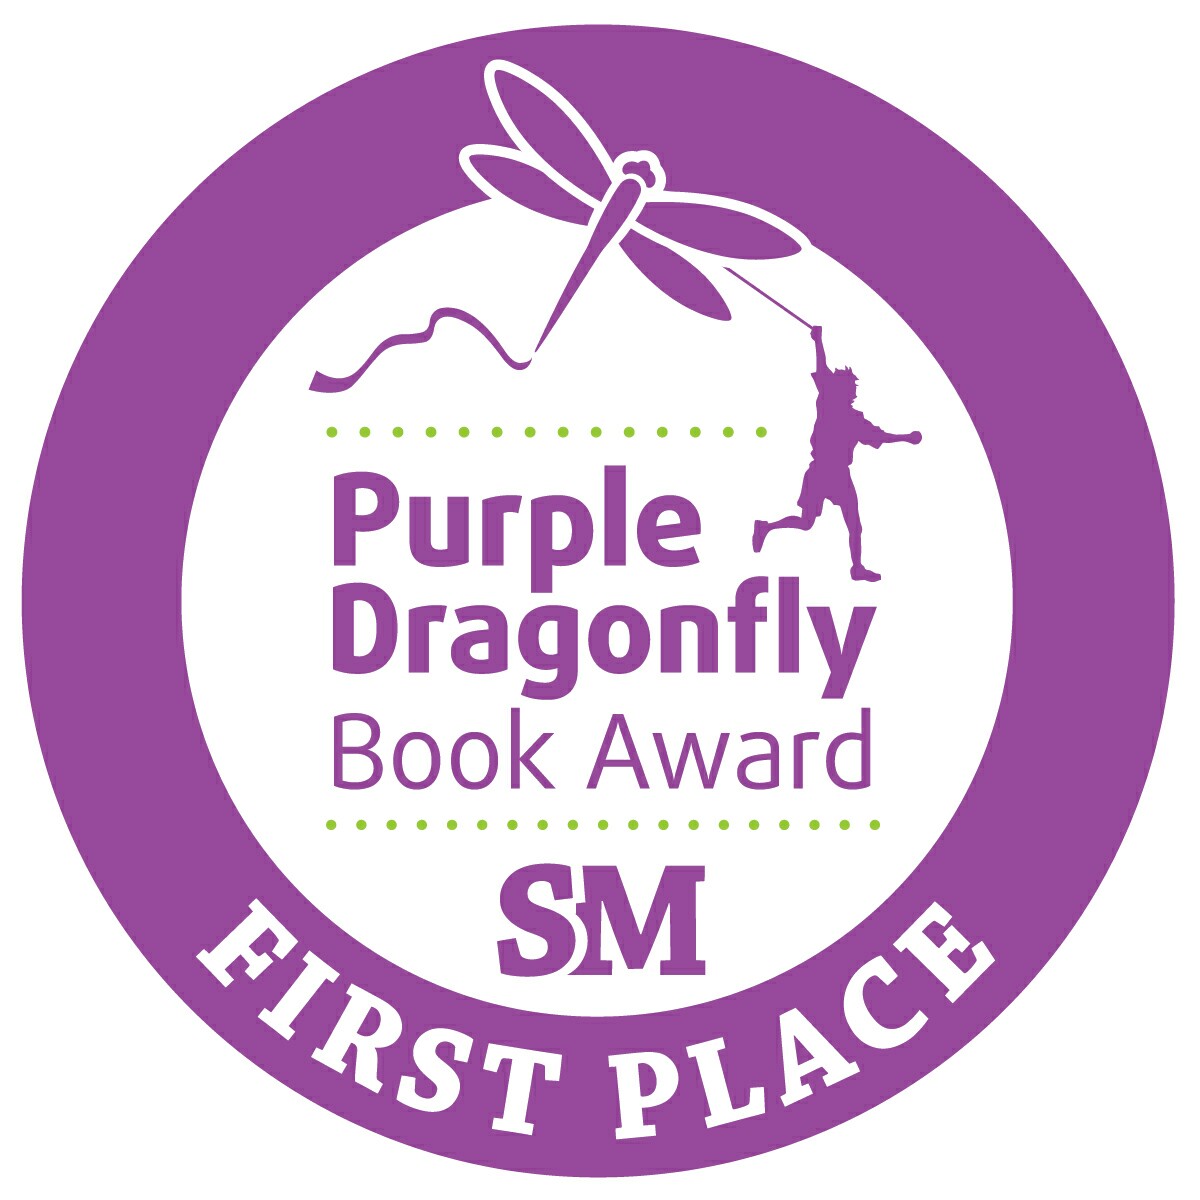 SM_Dragonfly_Purple_Seal_FirstPlace-01